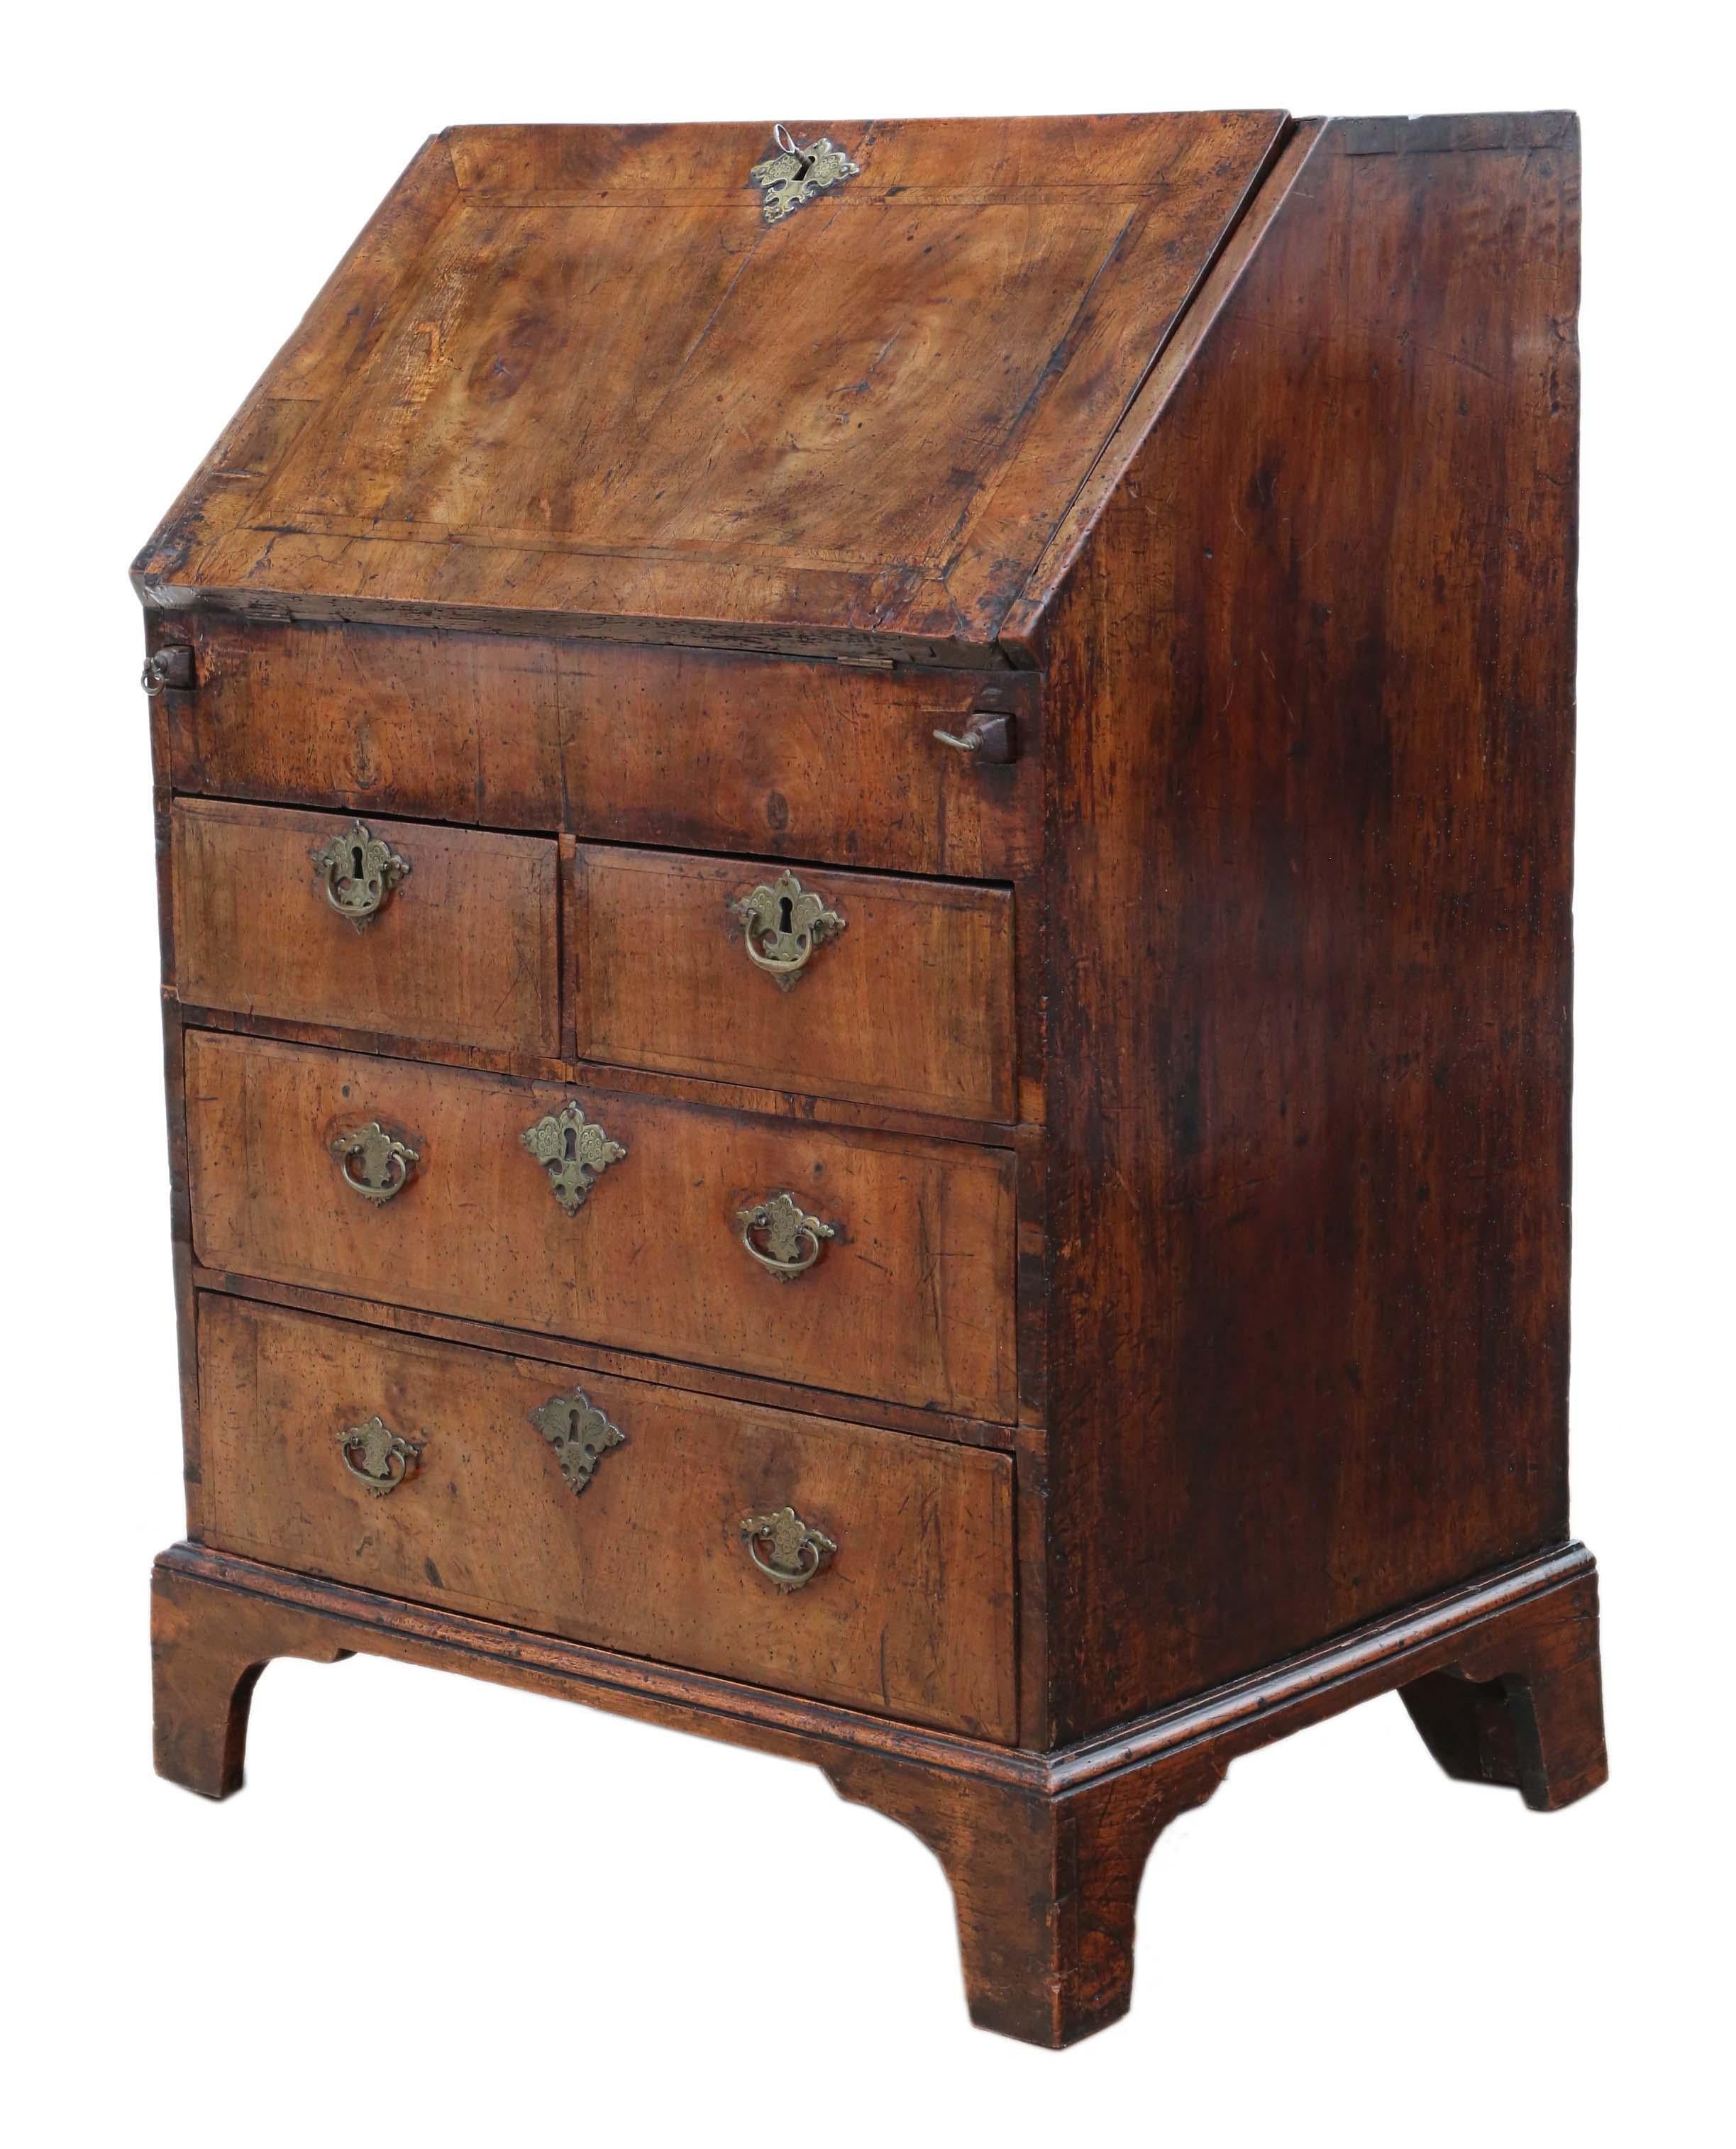 Antique Georgian early 18th Century cross banded walnut bureau desk writing tabl In Good Condition For Sale In Wisbech, Cambridgeshire